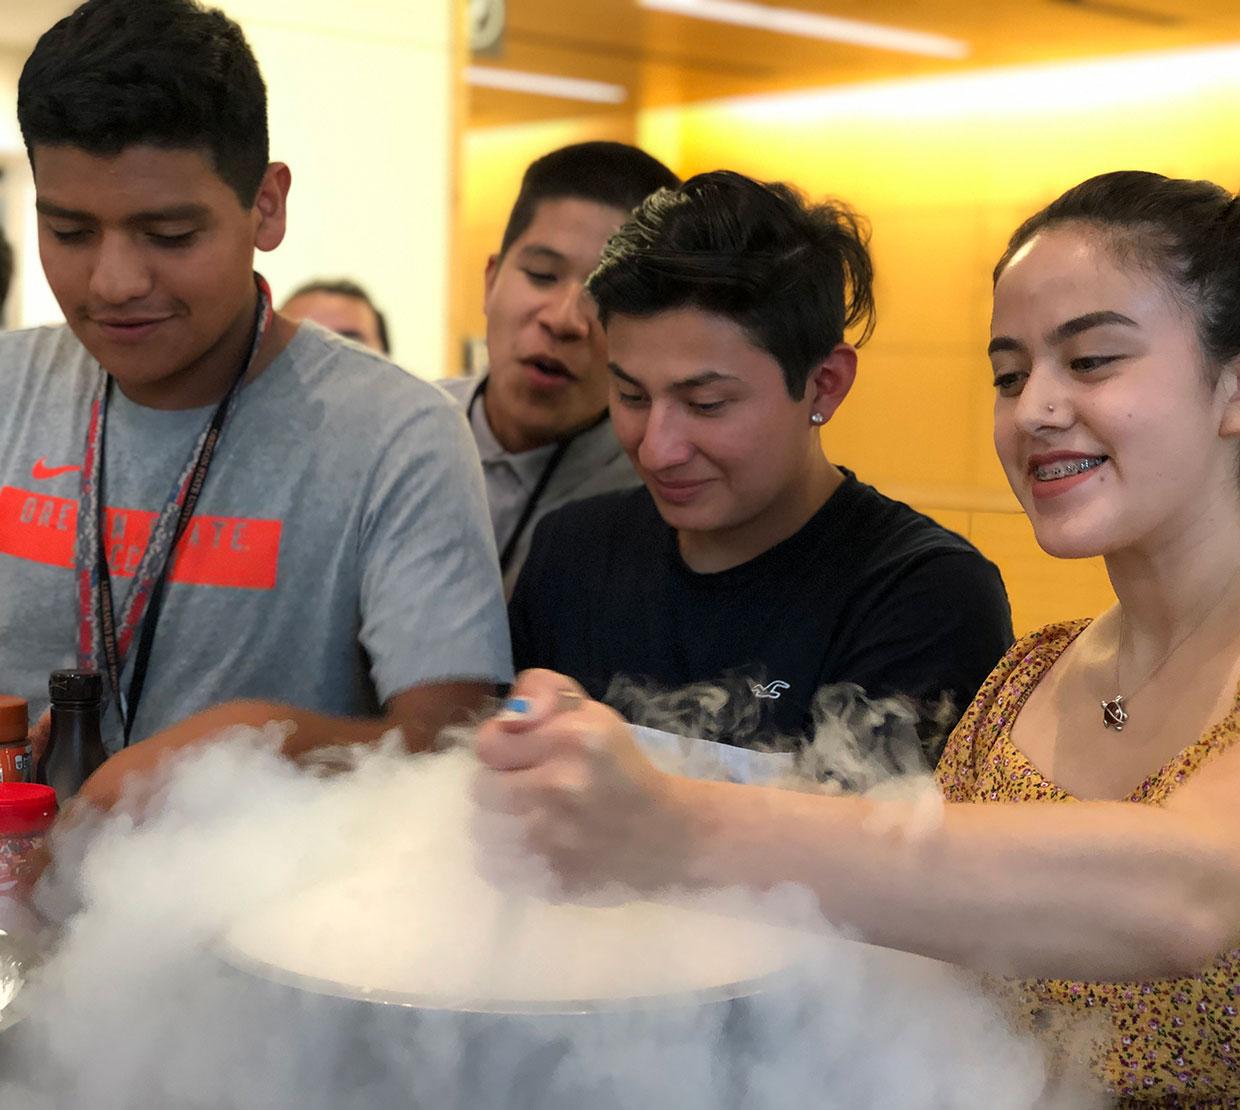 Juntos students experimenting with gas